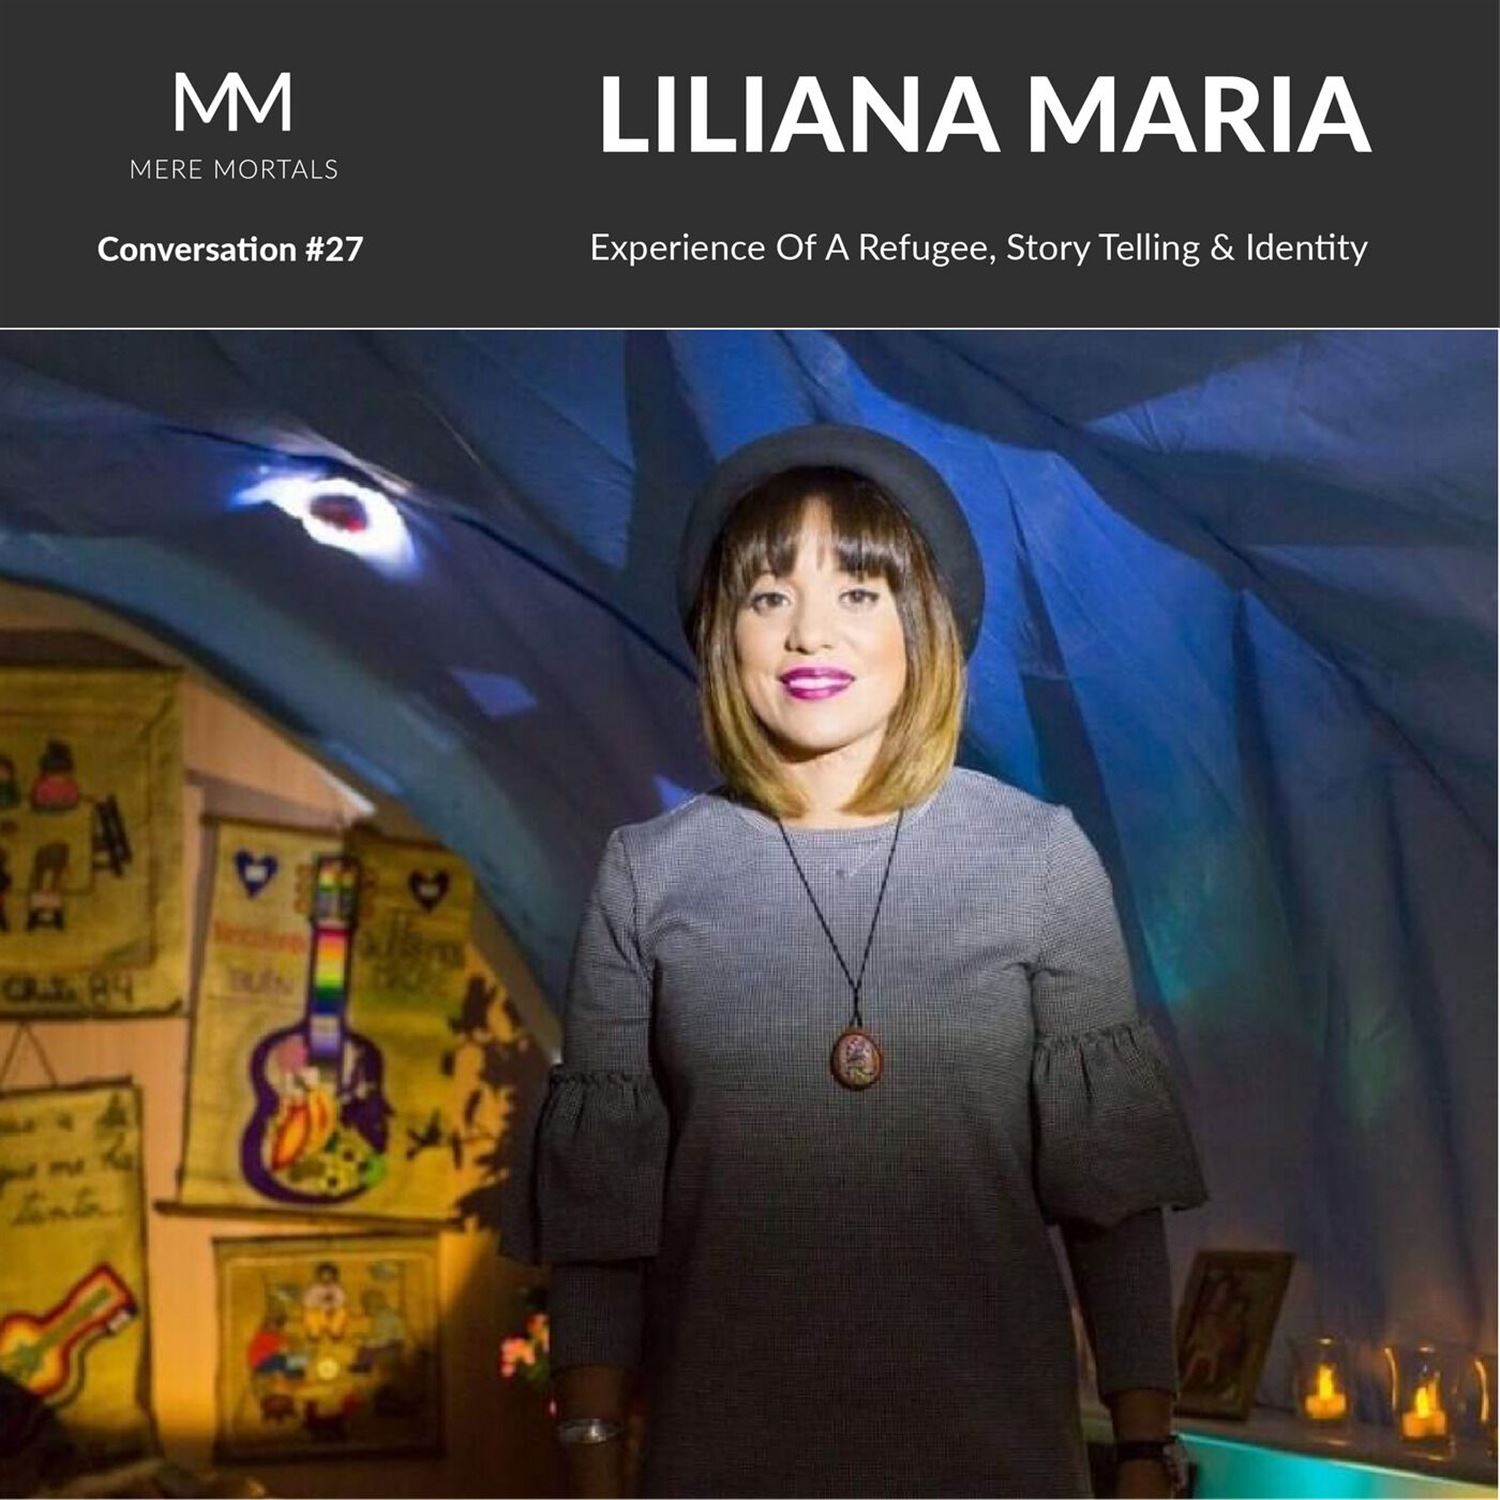 LILIANA MARIA | Experience Of A Refugee, Storytelling & Identity: Mere Mortals Conversation #27